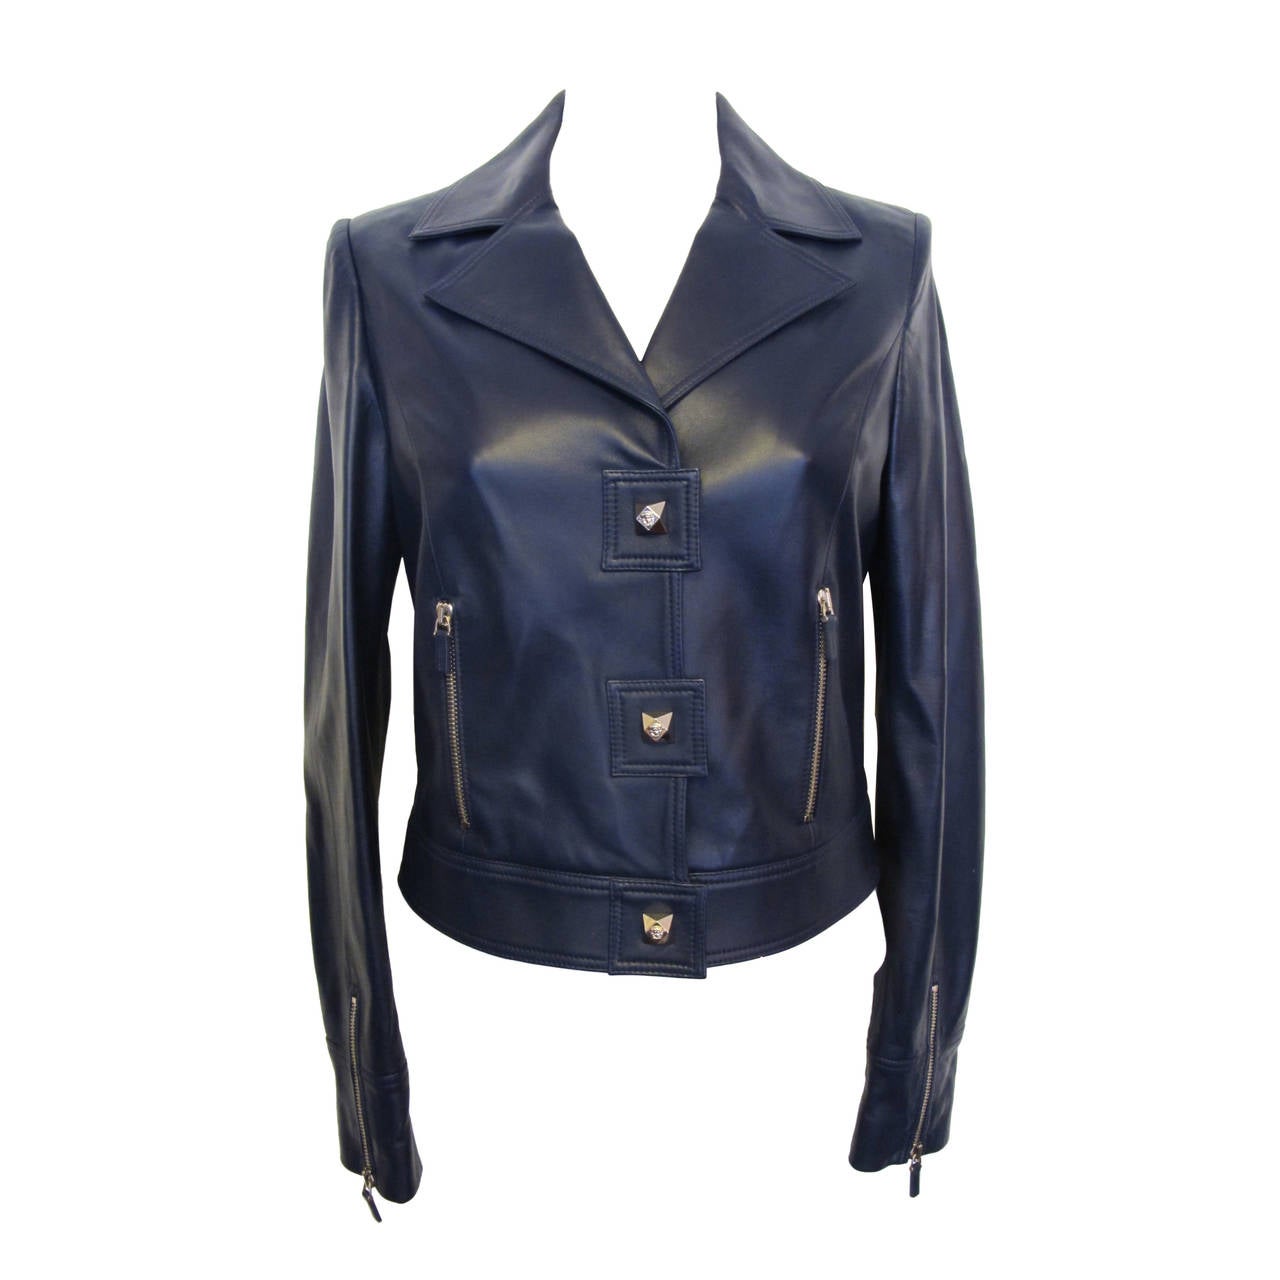 New 2012 Gianni Versace Navy Blue Leather Jacket For Sale